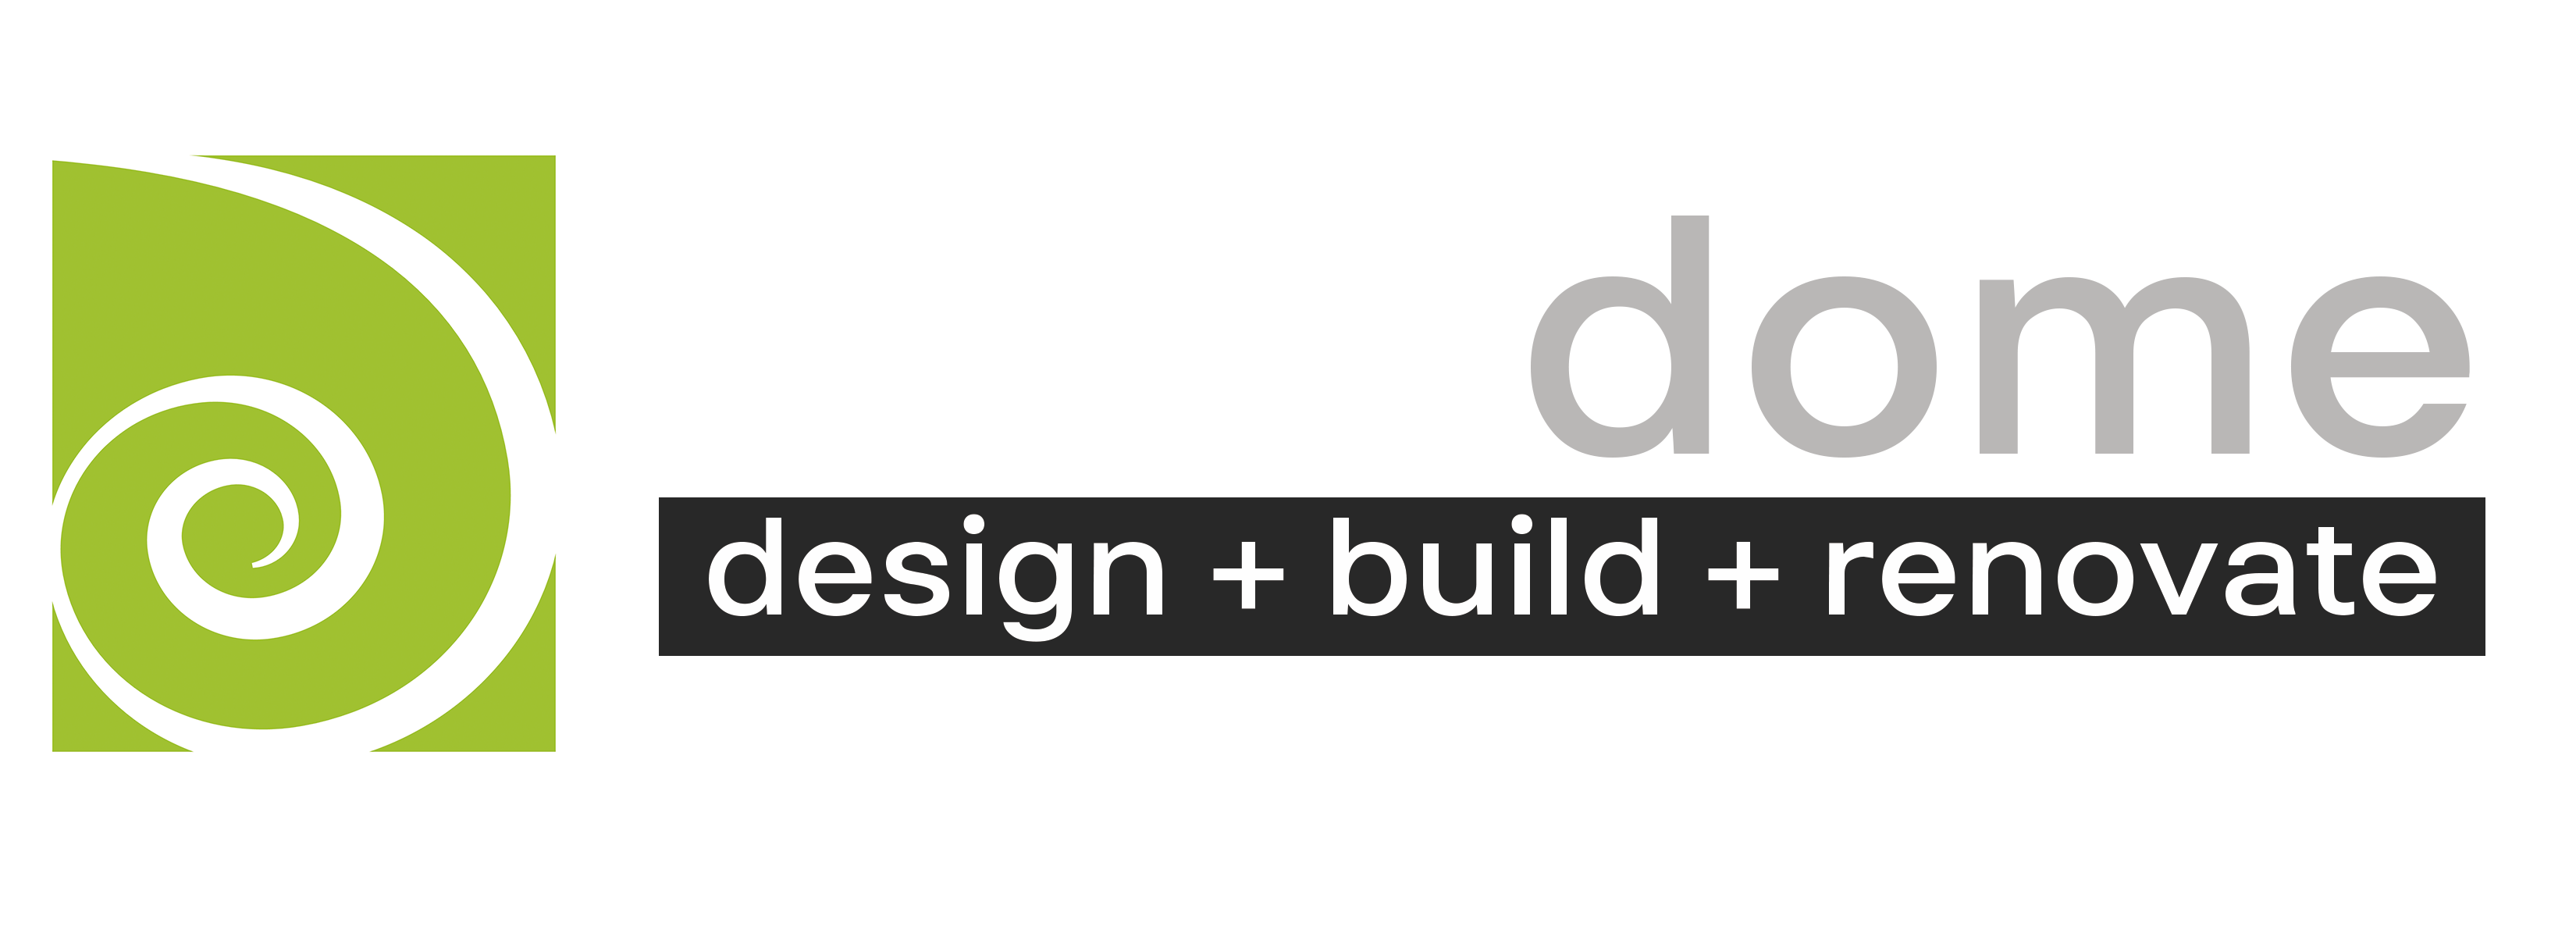 Archidome Construction